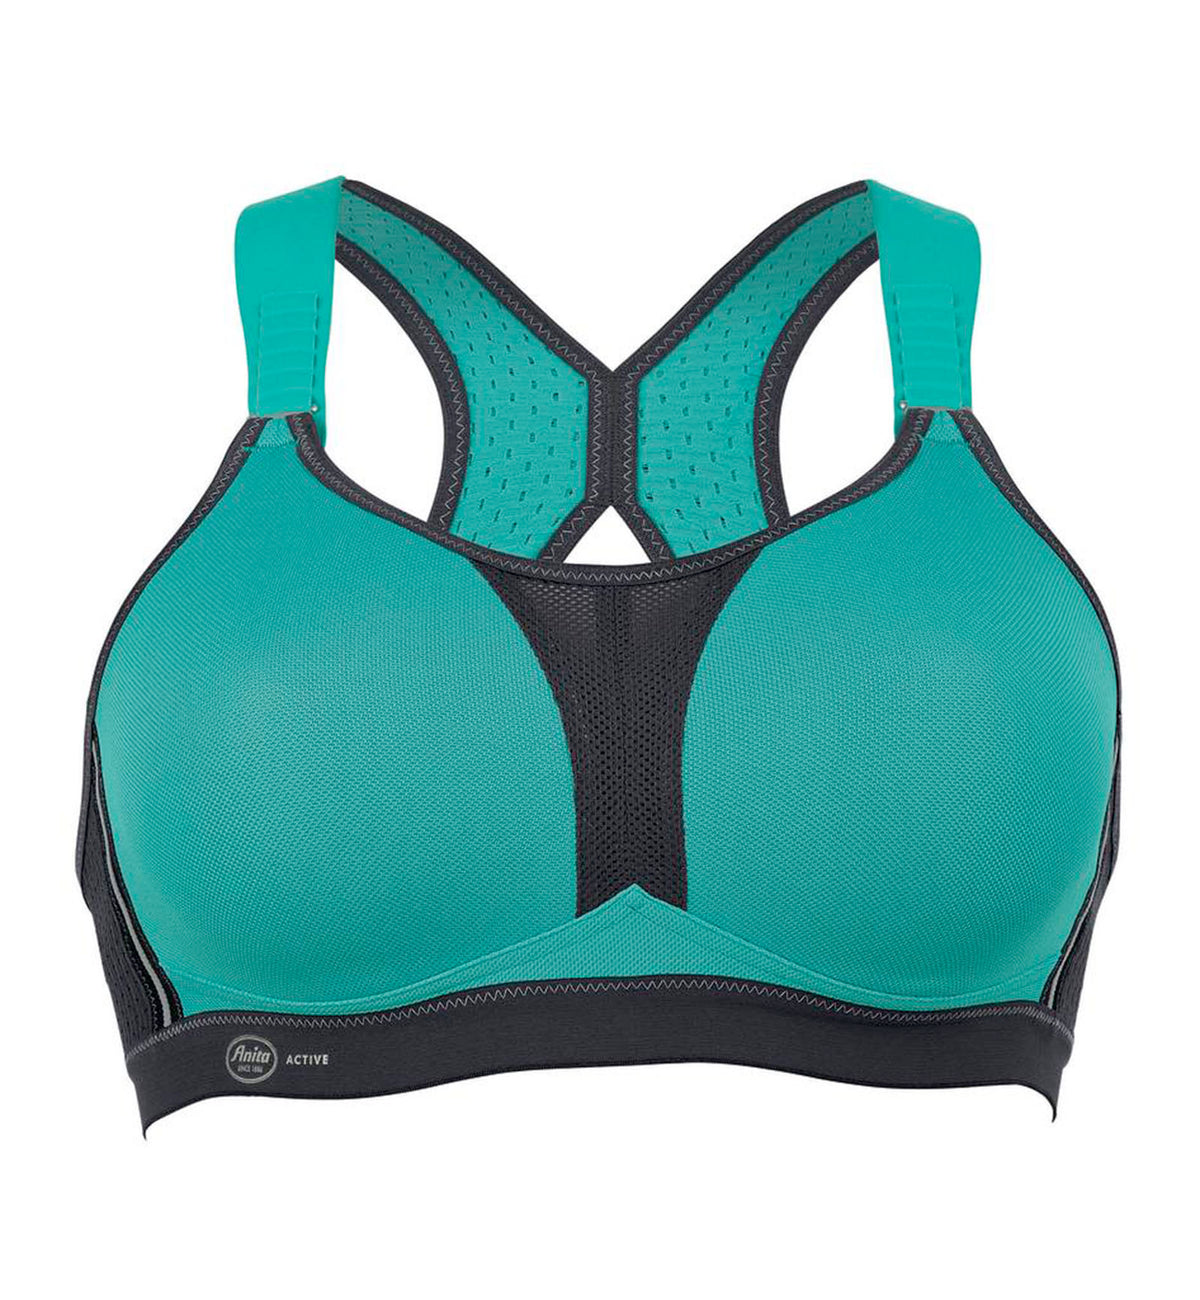 Anita Dynamix Star Max Support Softcup Sports Bra (5537),32B,Peacock/Anthracite - Peacock/Anthracite,32B